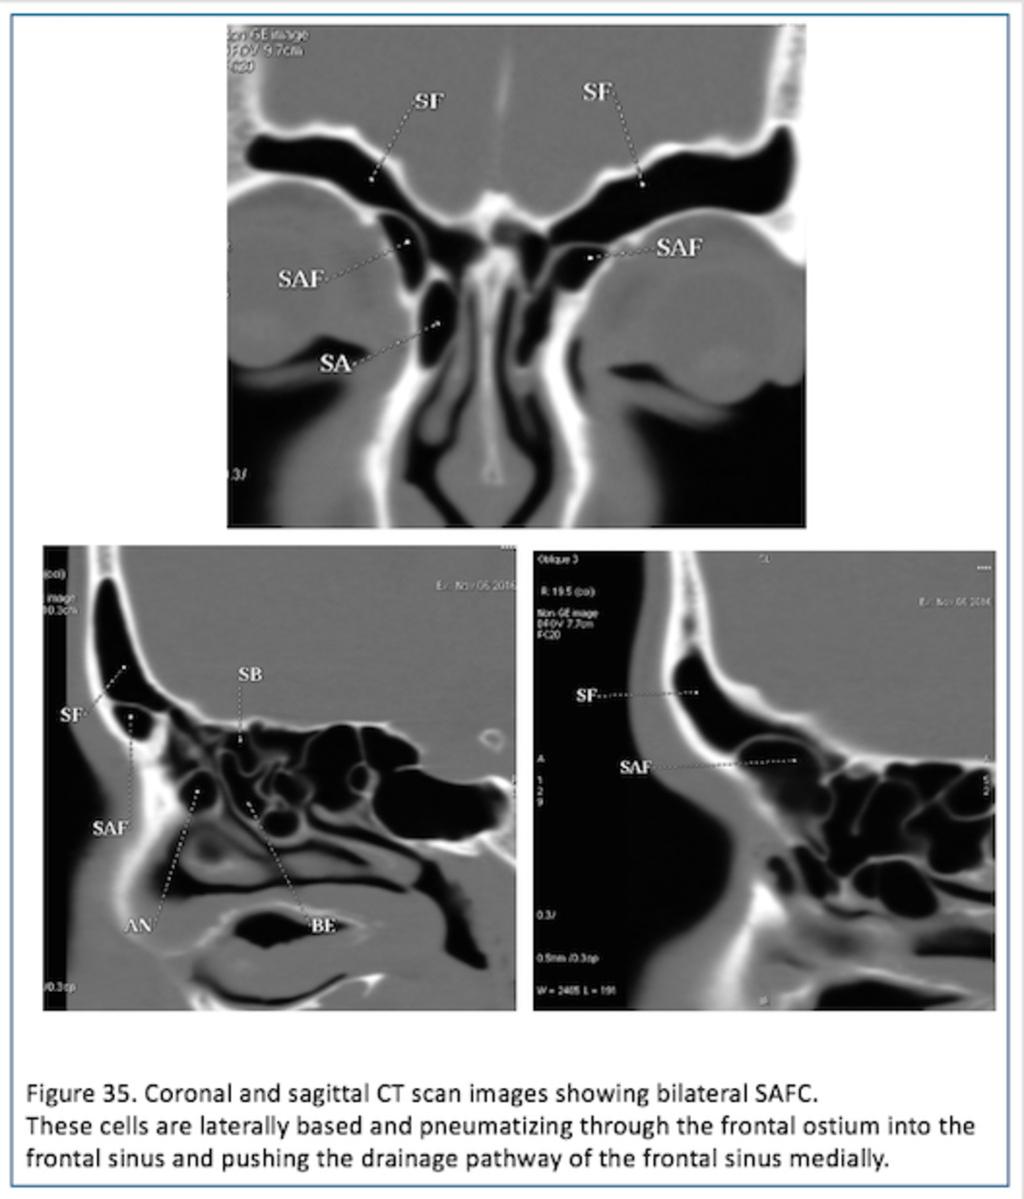 Fig. 35: Figure 35. Coronal and sagittal CT scan images showing bilateral SAFC.